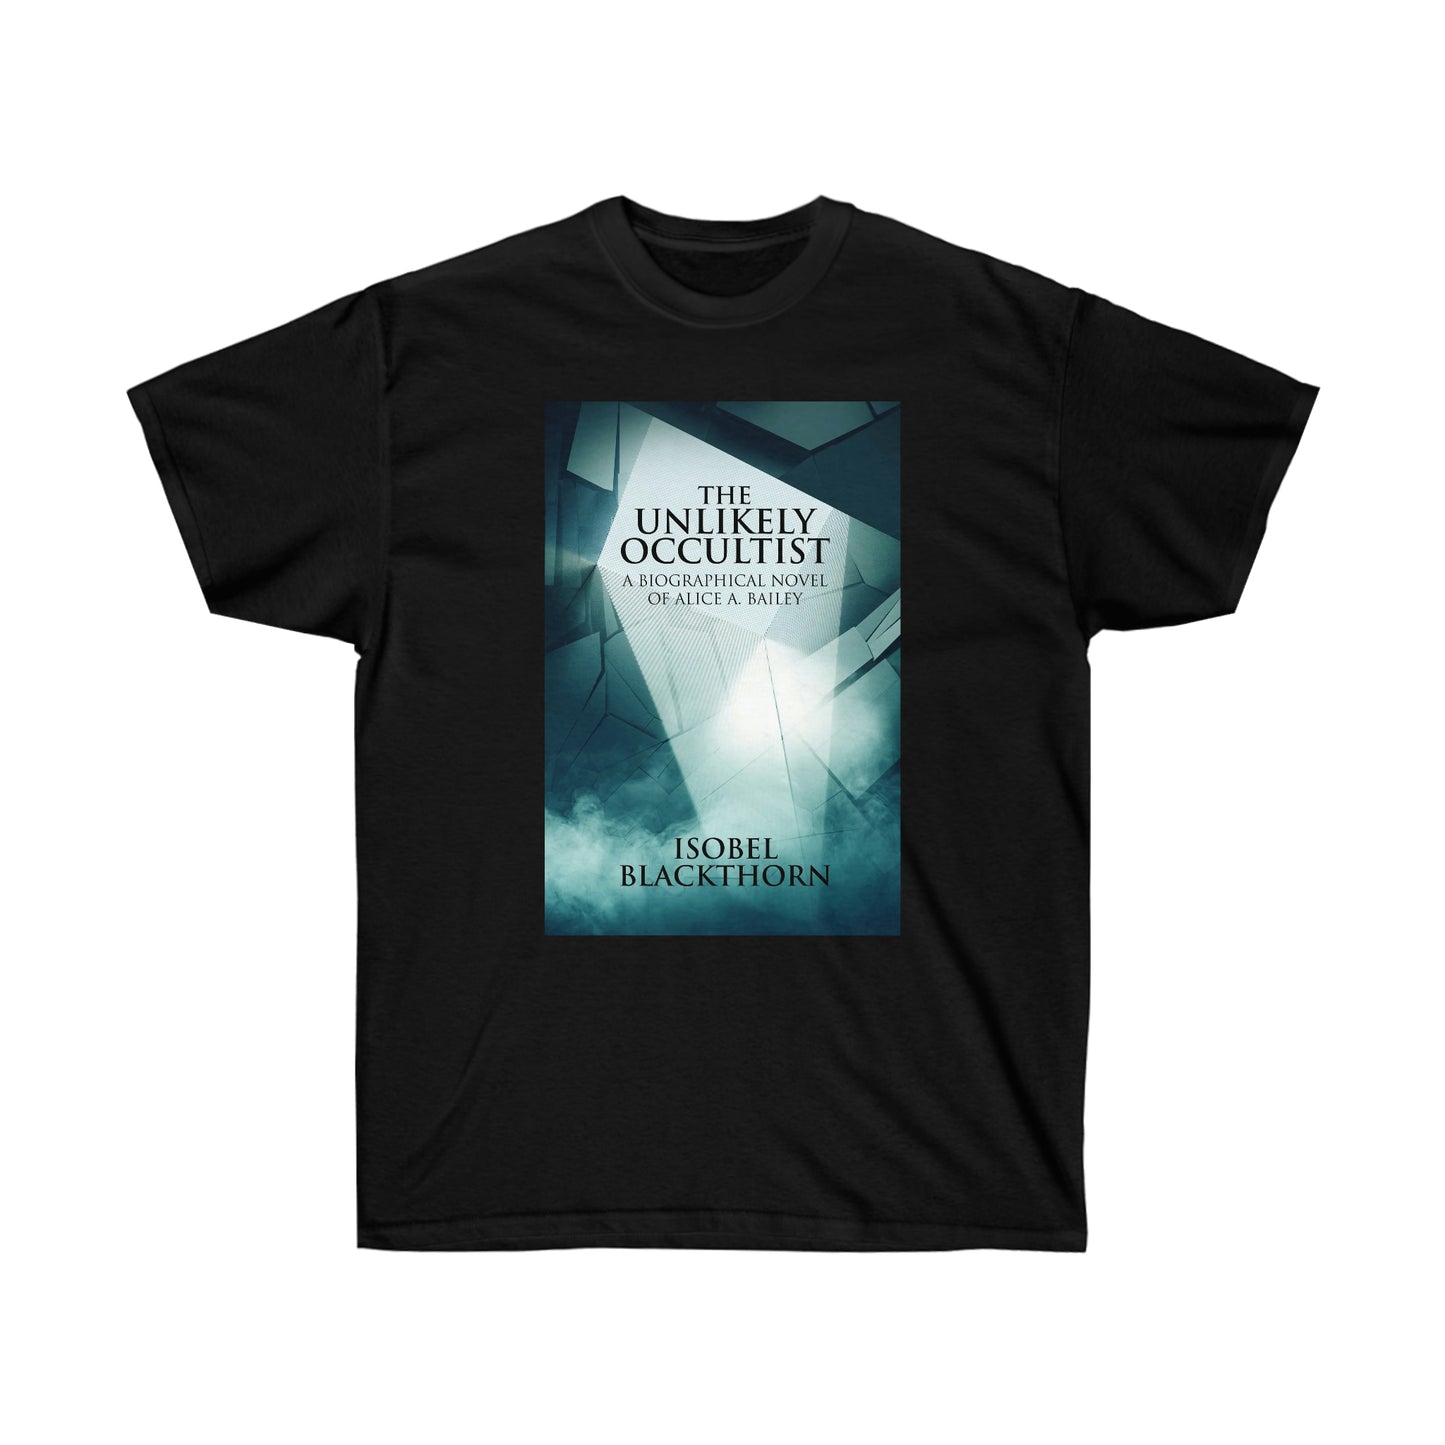 The Unlikely Occultist - Unisex T-Shirt